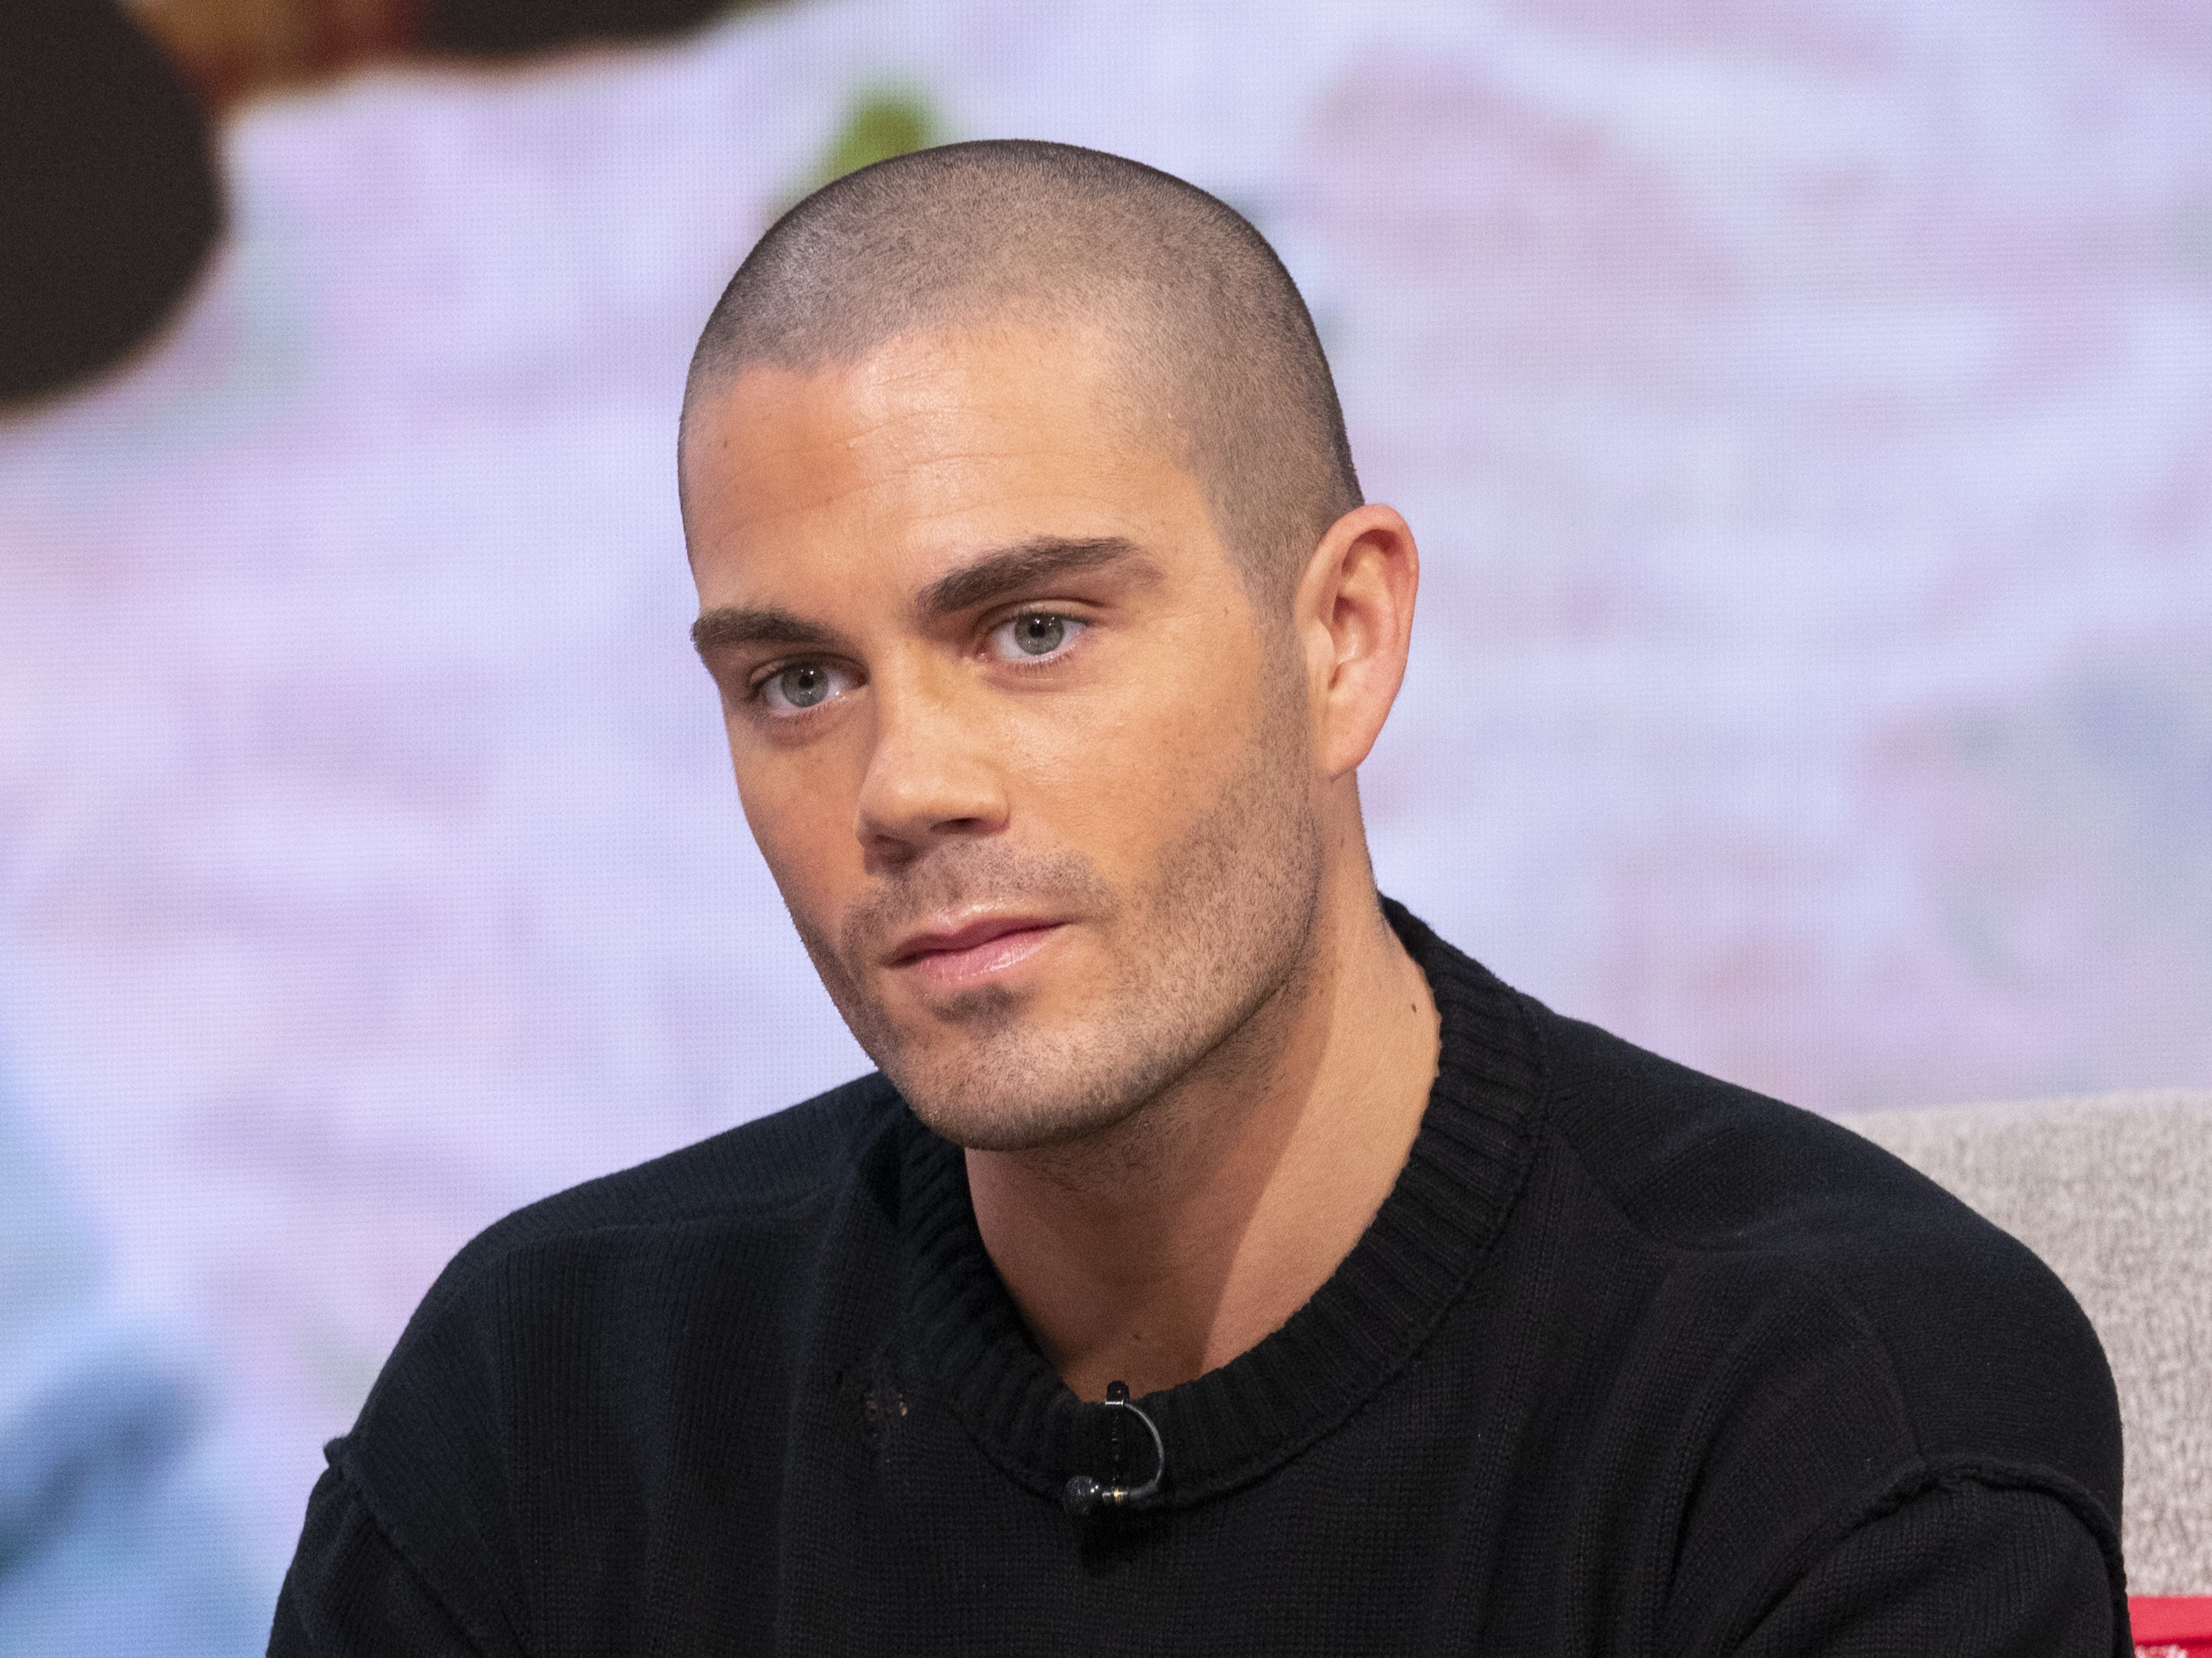 The Wanted singer Max George has spoken about his struggles with depression